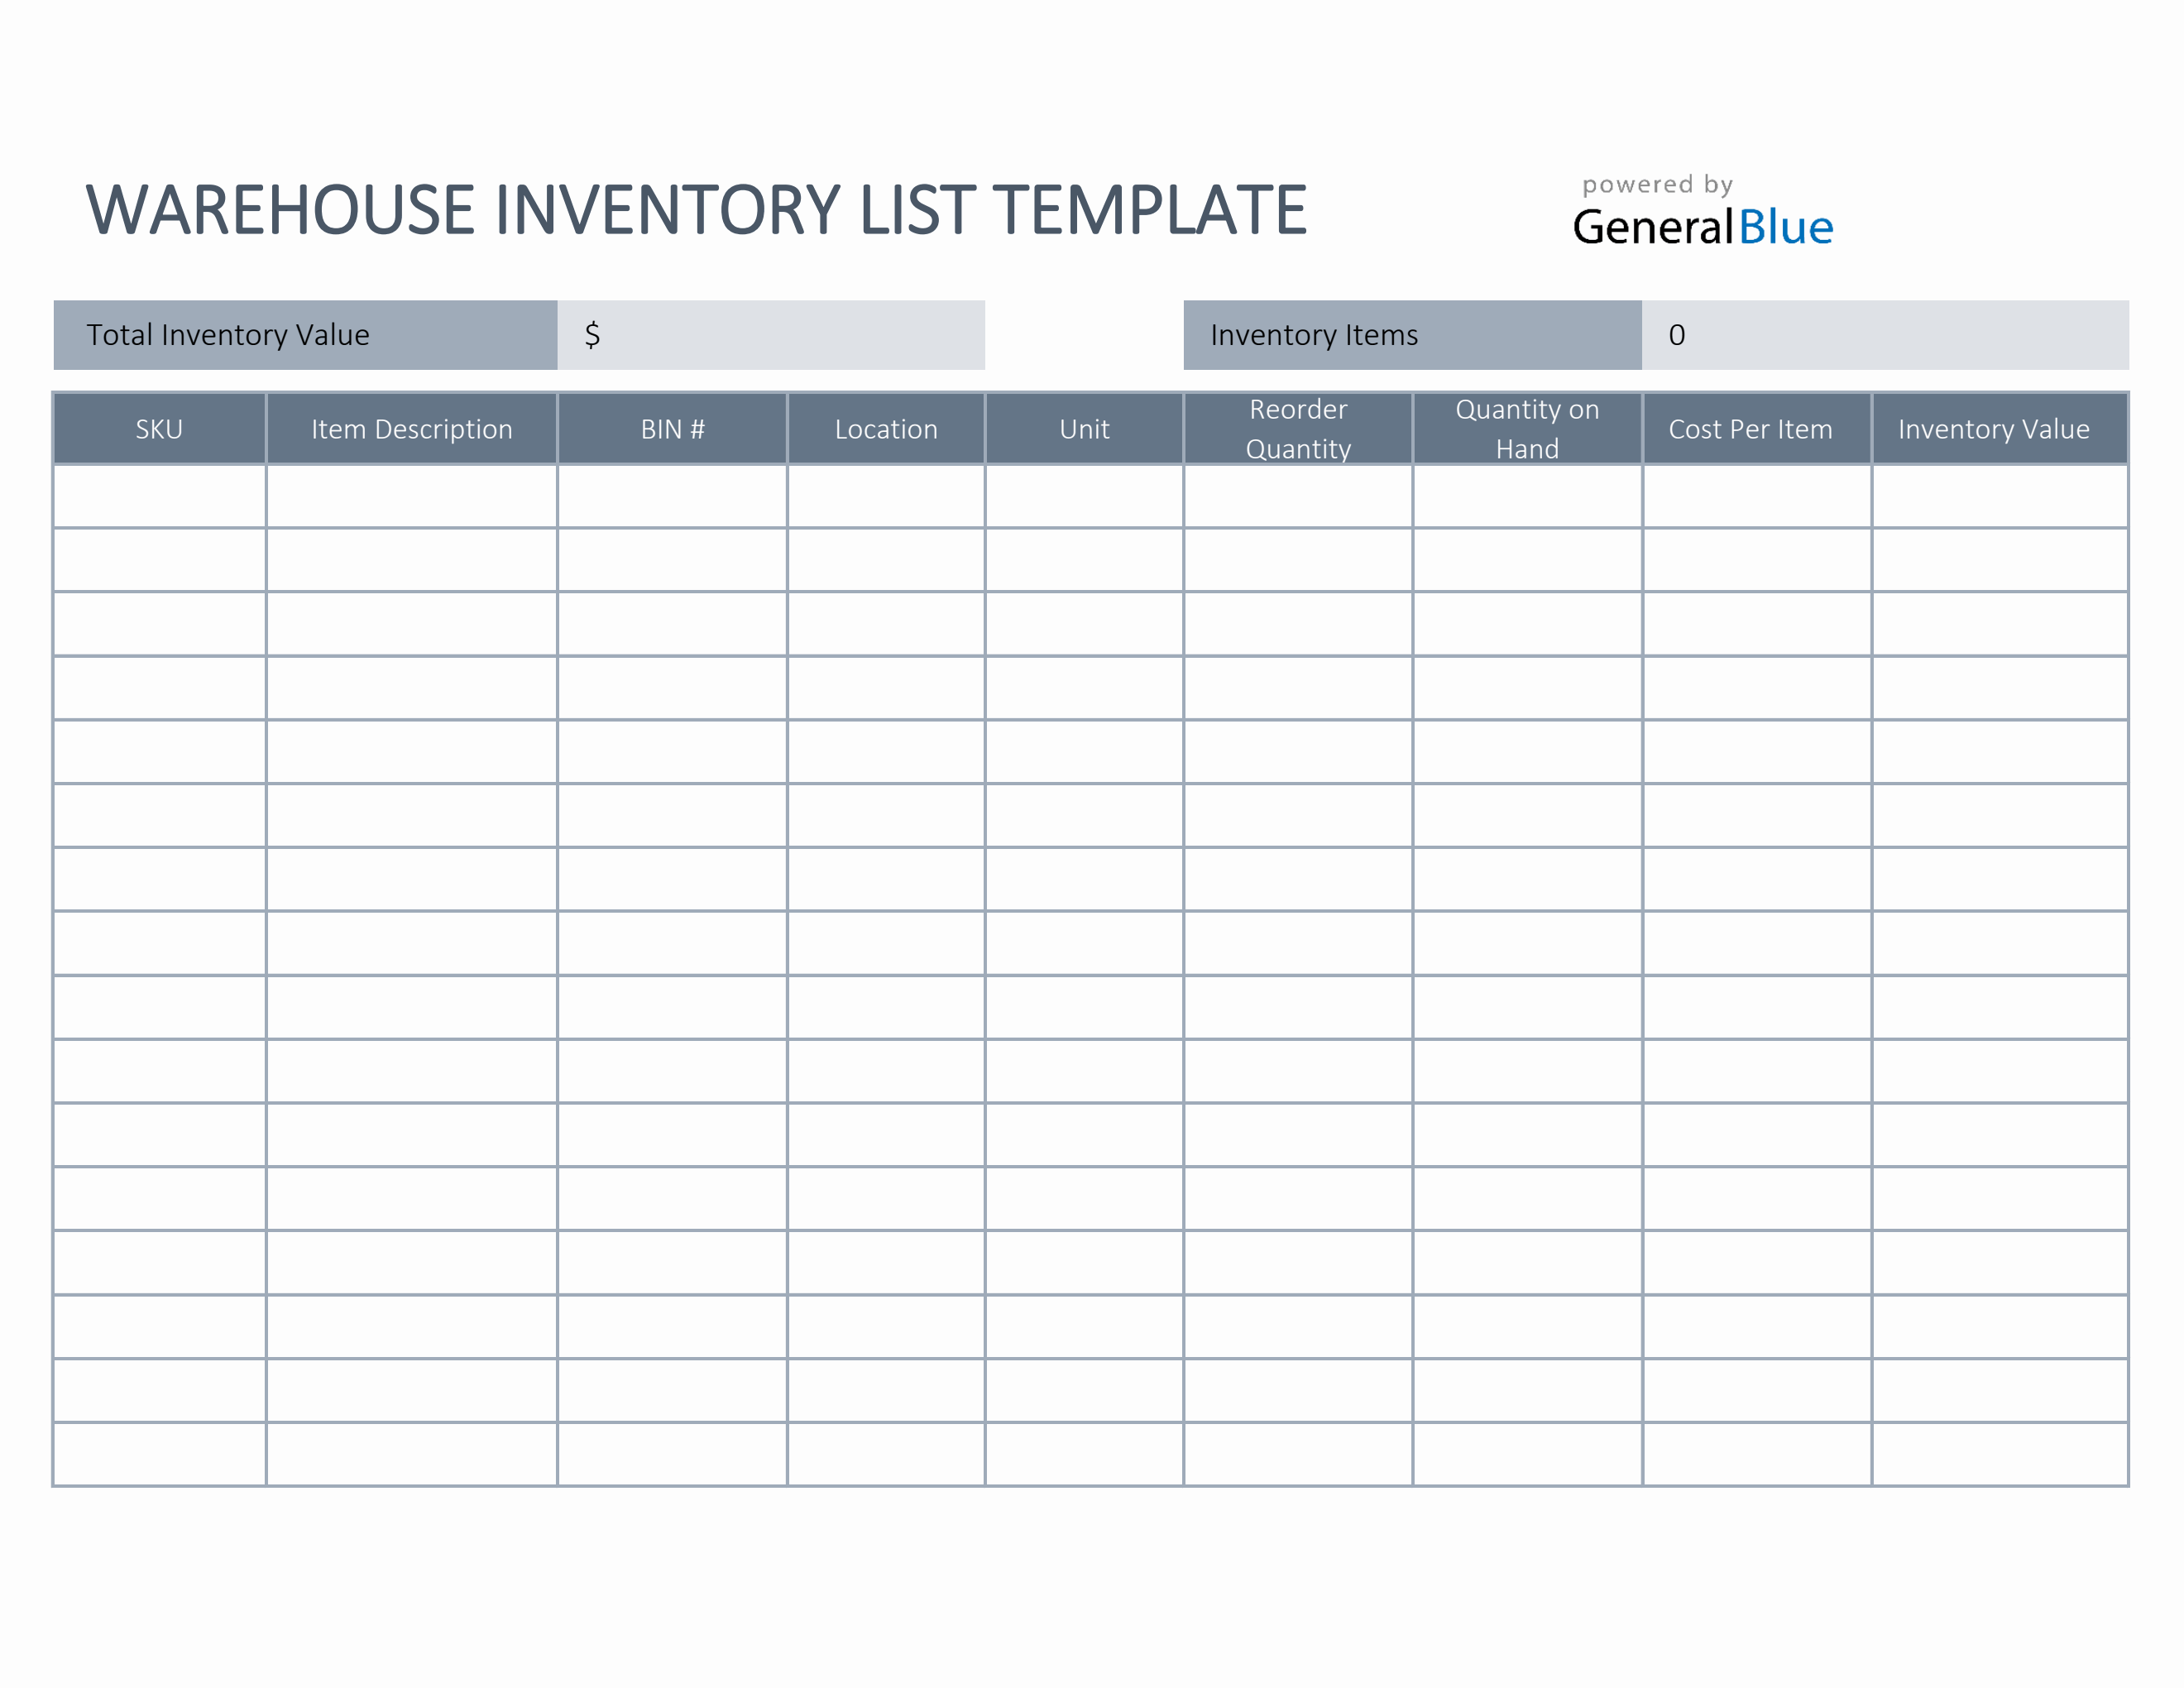 Supply Inventory Templates